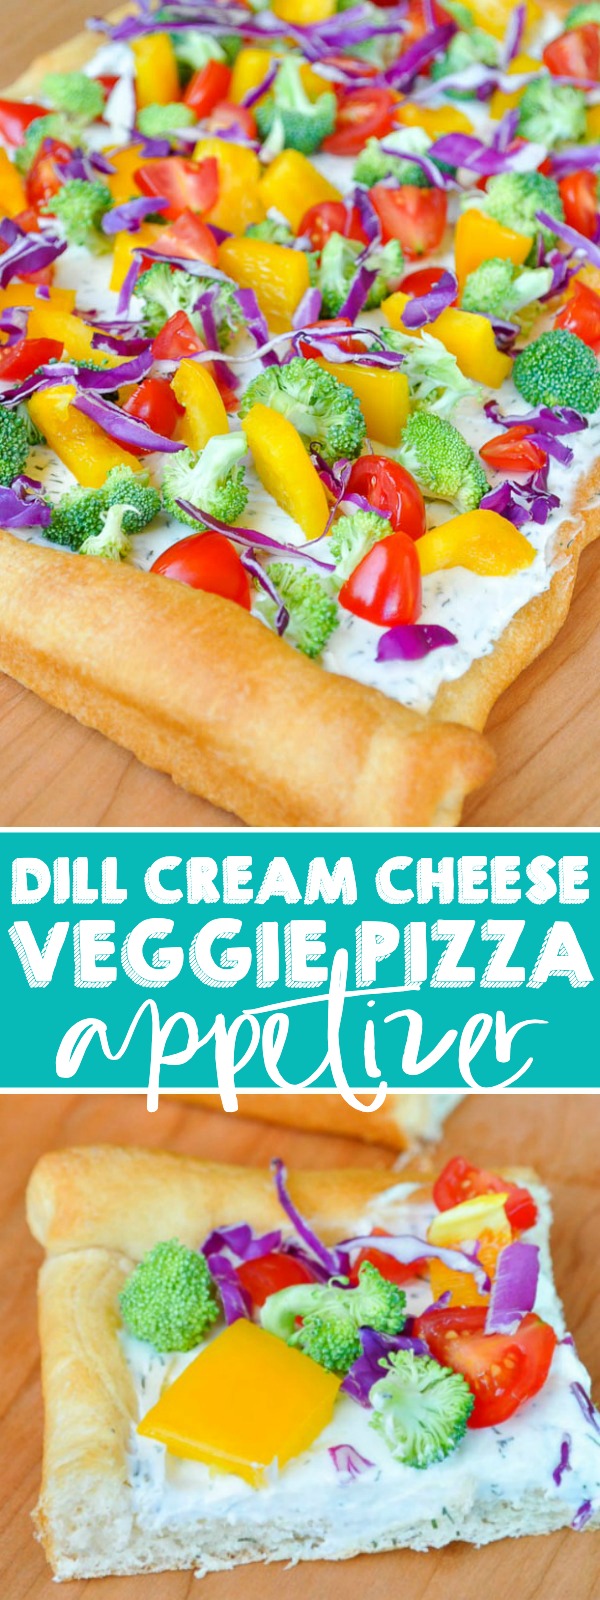 Dill Cream Cheese Veggie Pizza Appetizer - This light, colorful pizza recipe is the perfect summer appetizer! | The Love Nerds #healthyappetizer #flatbreadrecipe #rainbowrecipe